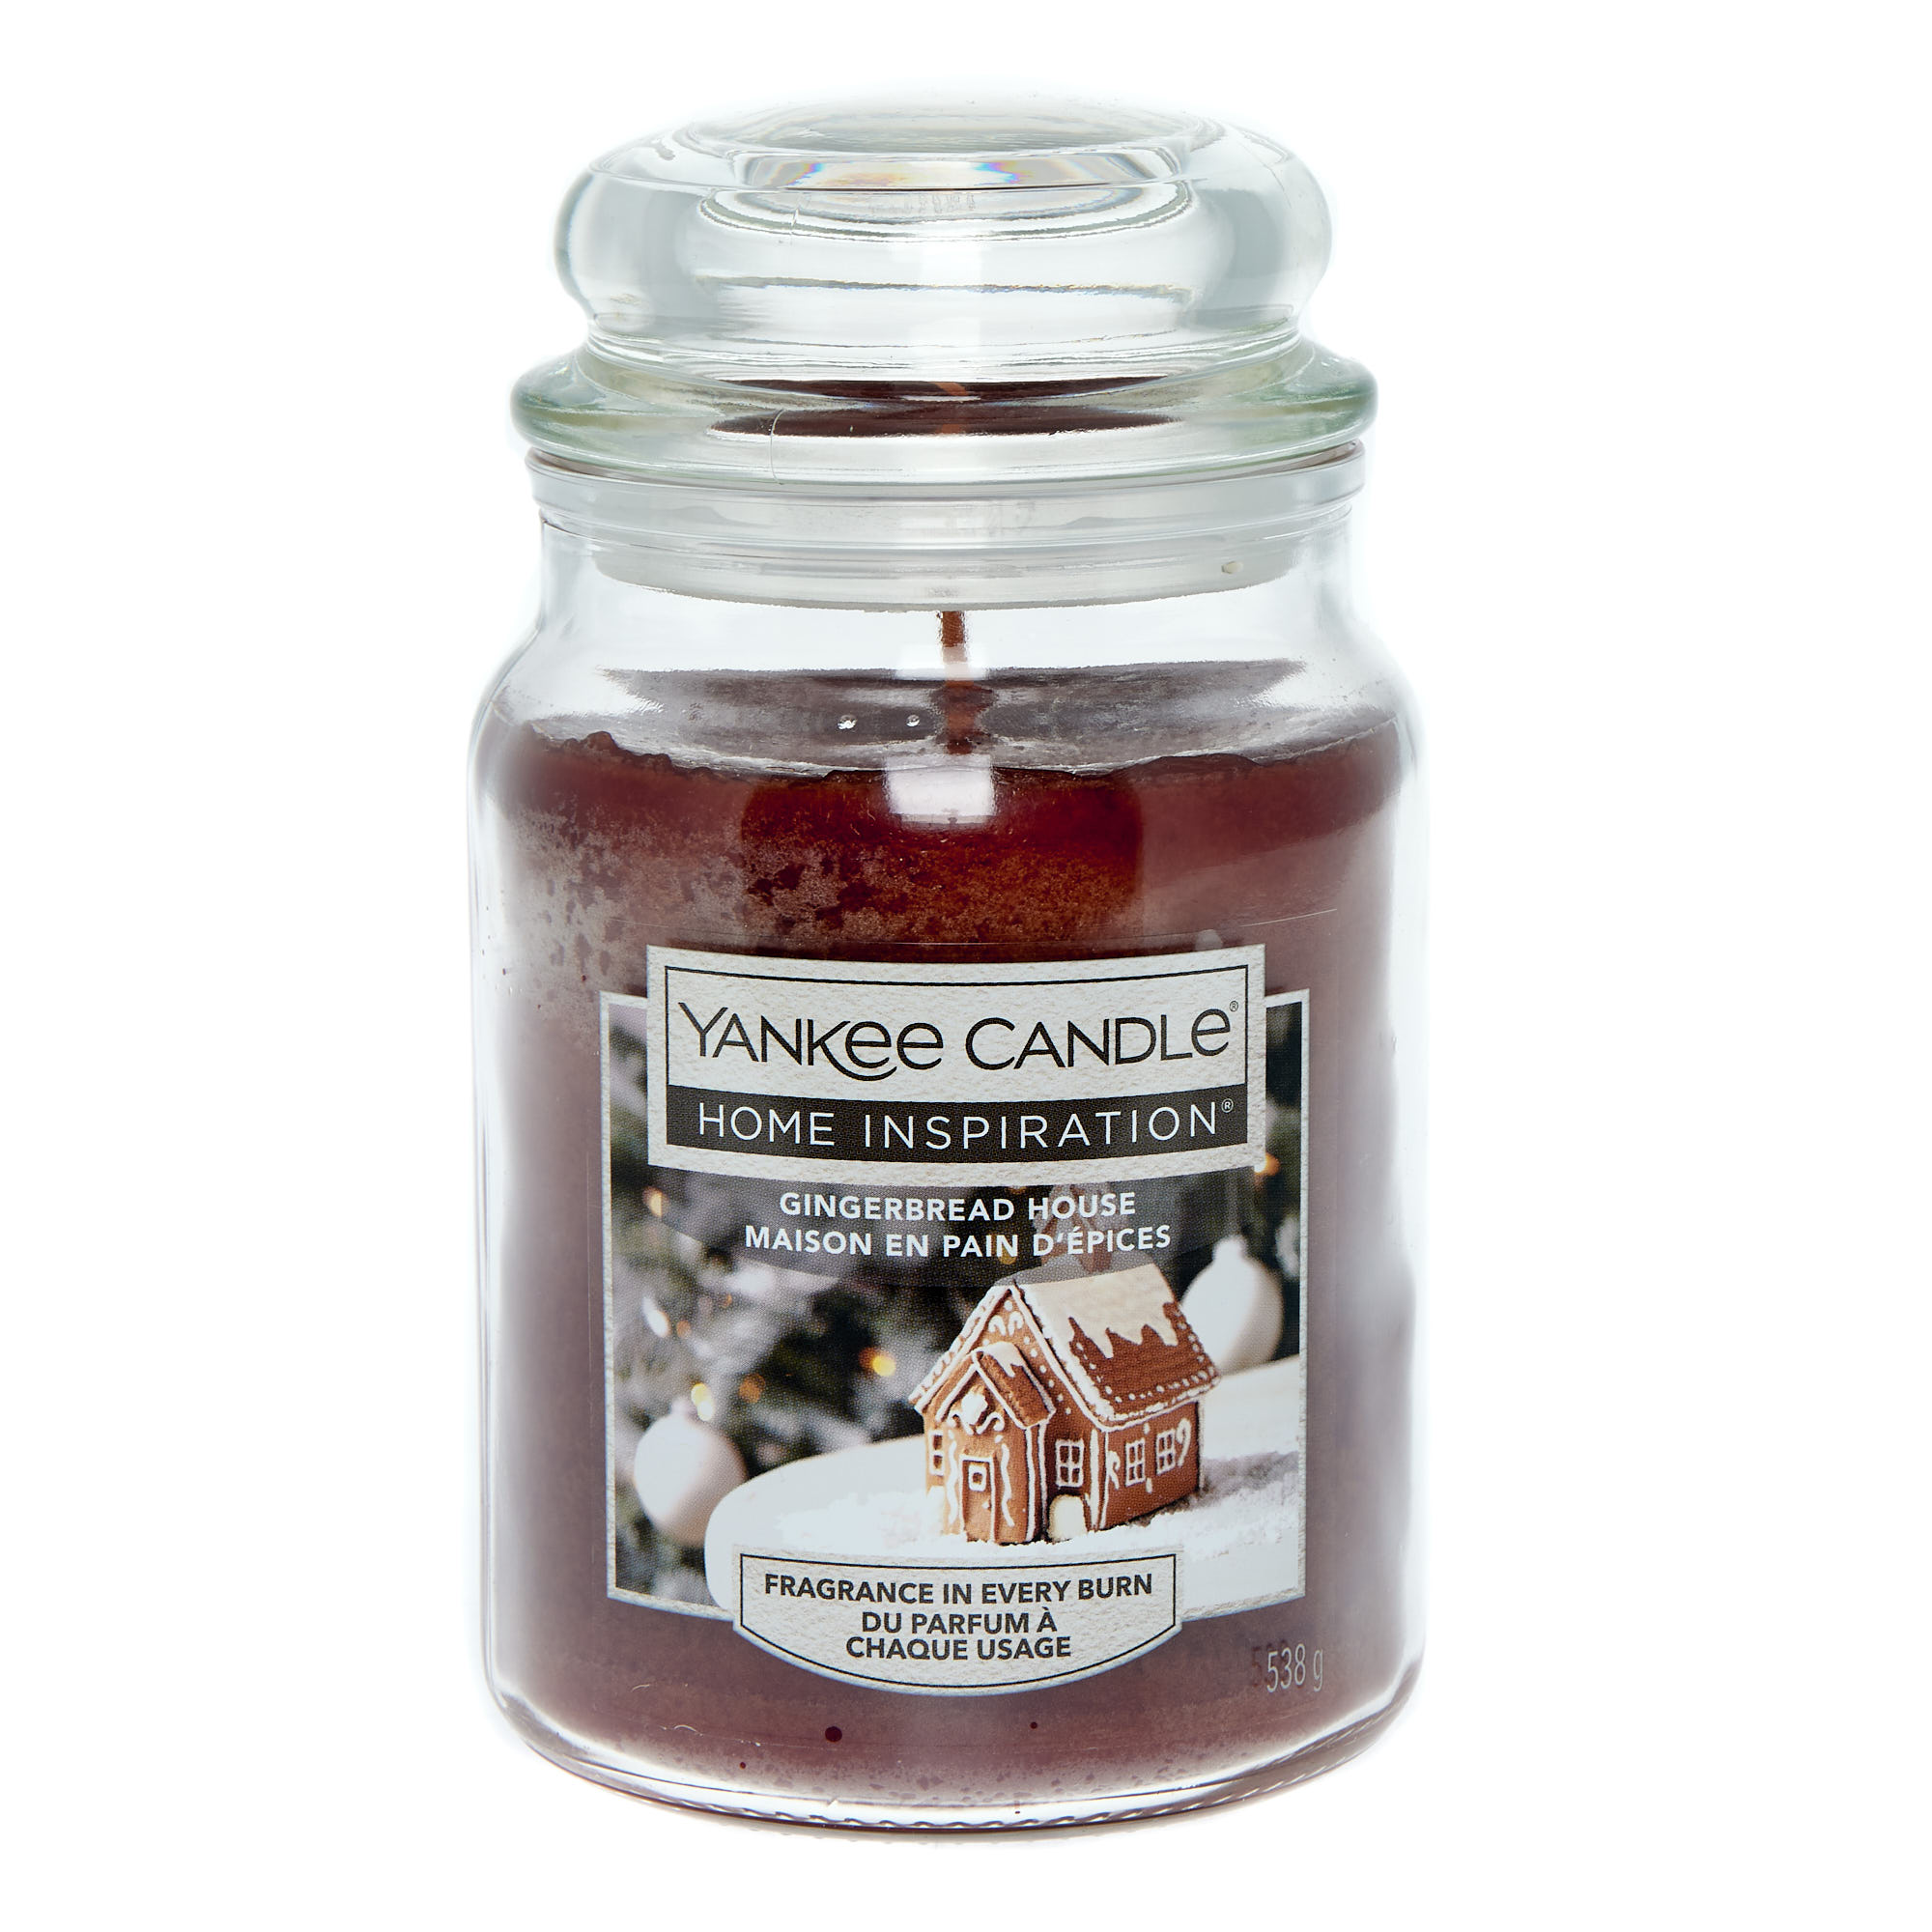 Large Yankee Candle Home Inspiration Gingerbread House Scented Candle